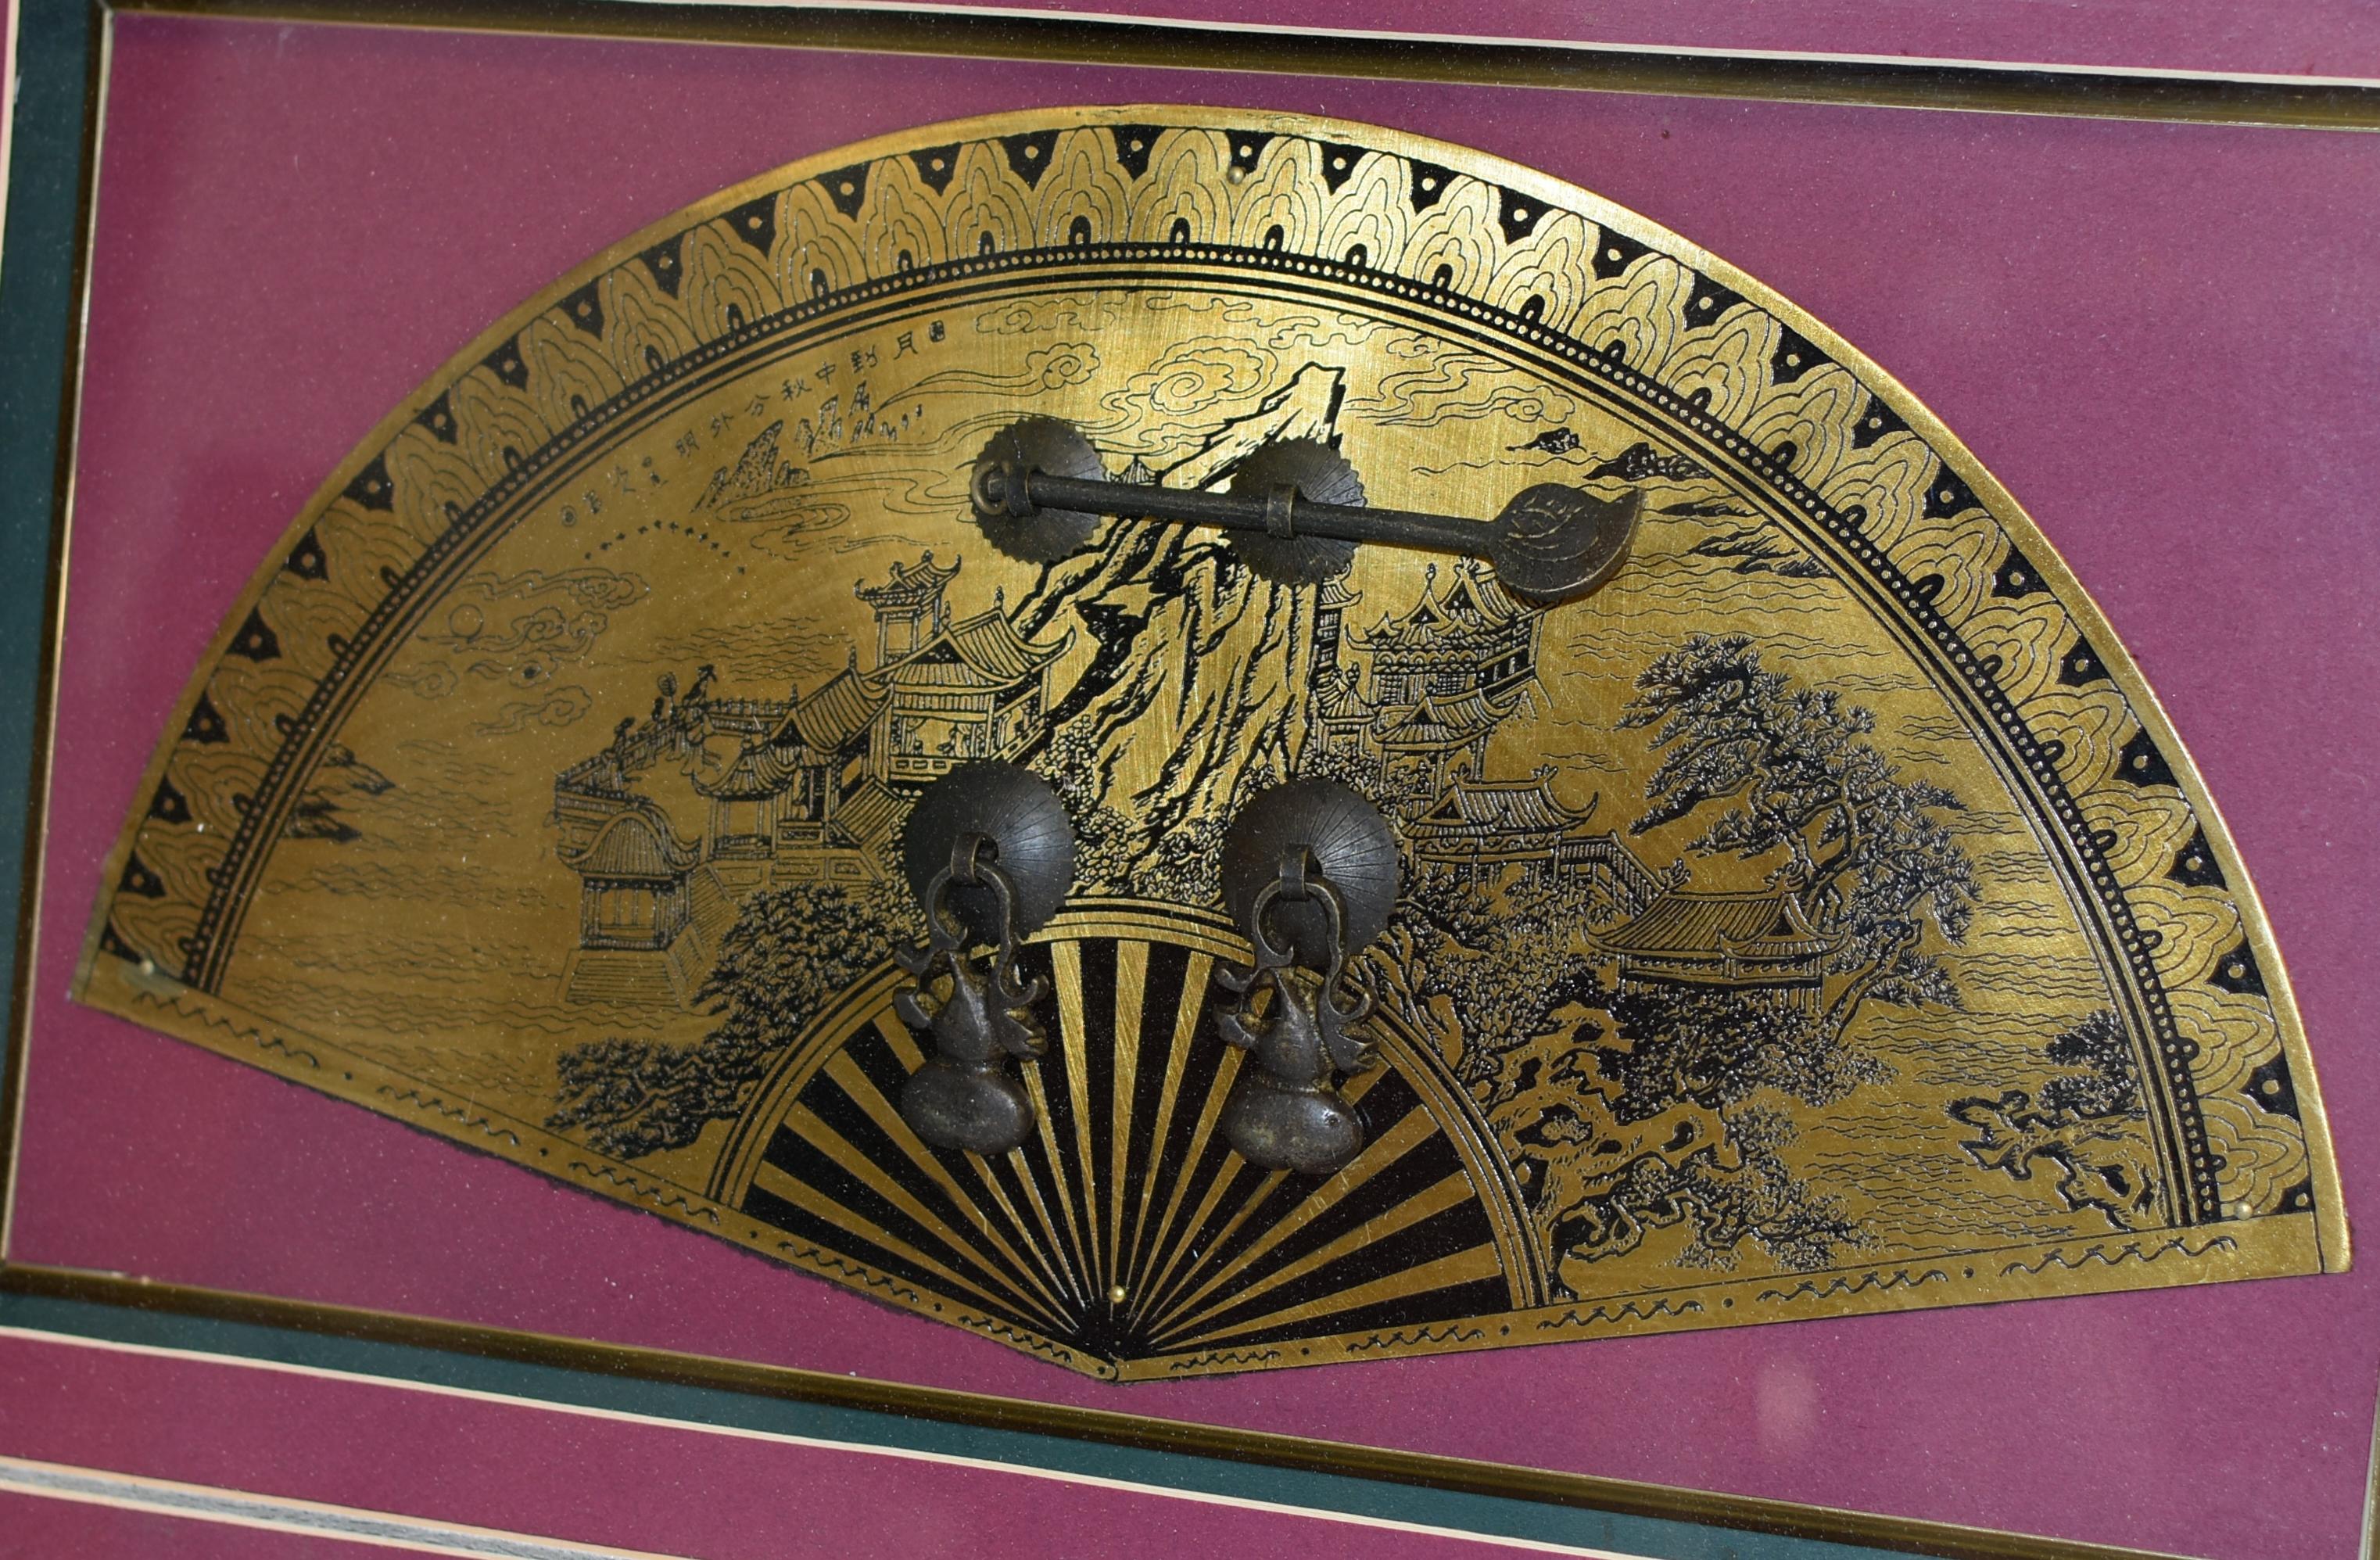 A vintage shadowbox of solid brass hardware. The exceptionally large fan-shaped door plate is prominently featured, displaying great details of a finely engraved celestial scene. Pavilions with immortals standing in the court yard looking out to the